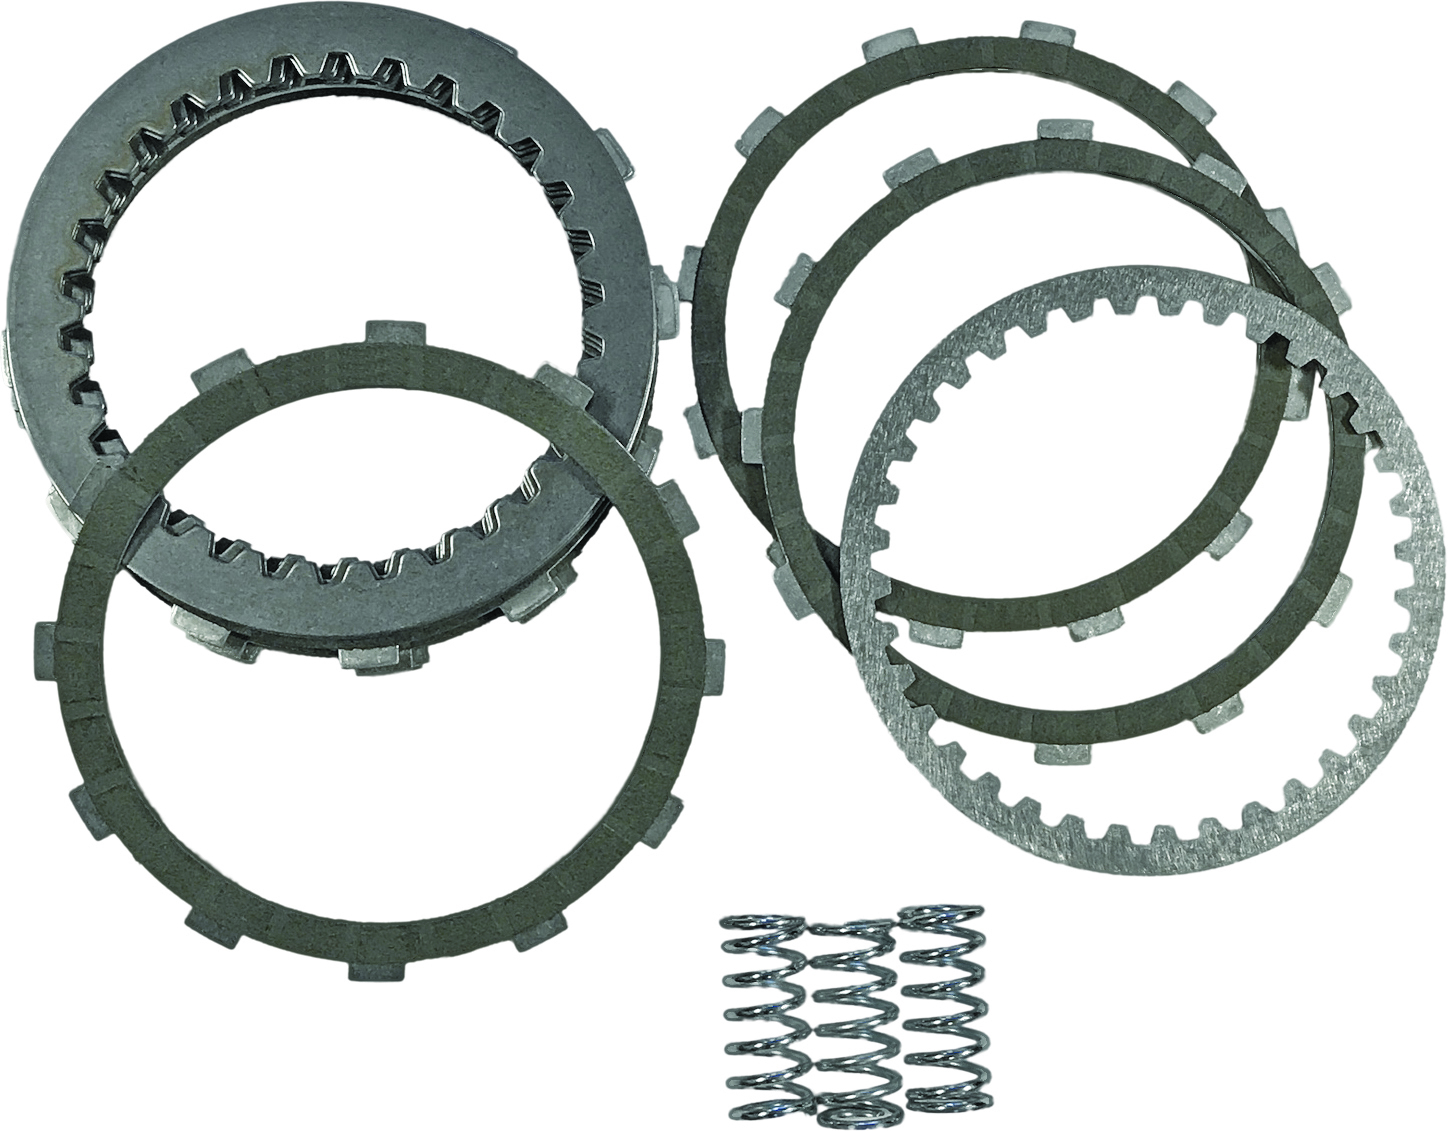 Replacement Clutch Kit - For 13-17 Harley CVO - Click Image to Close